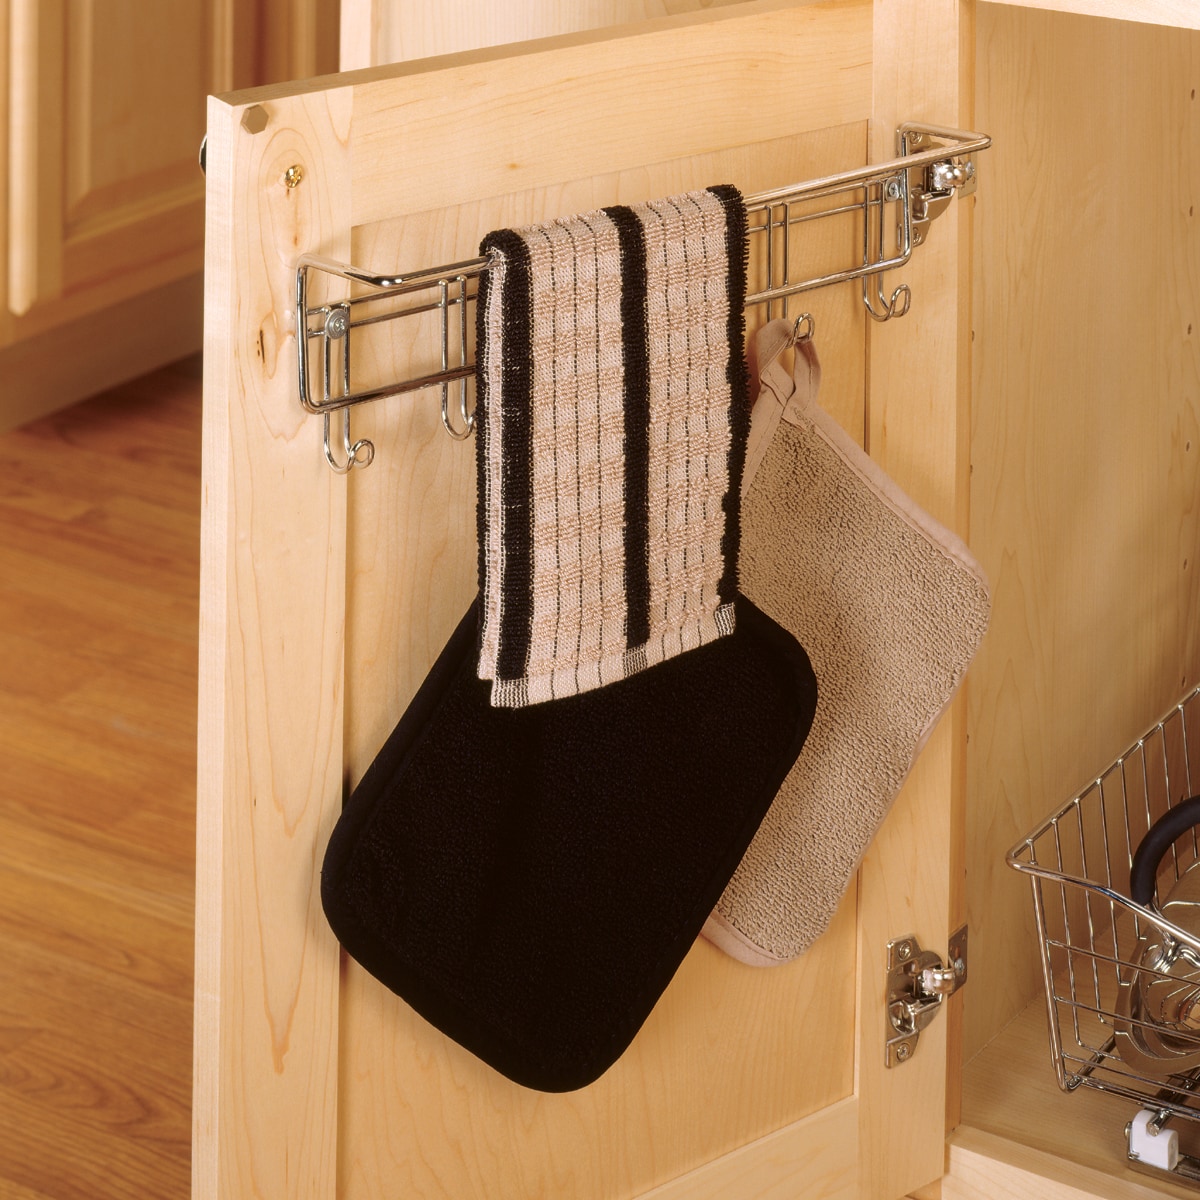 Sorbus Towel Rack Holder Set - Wall Mounted Storage Organizer for Towels, Washcloths, Hand Towels, Linens, Ideal for Bathroom